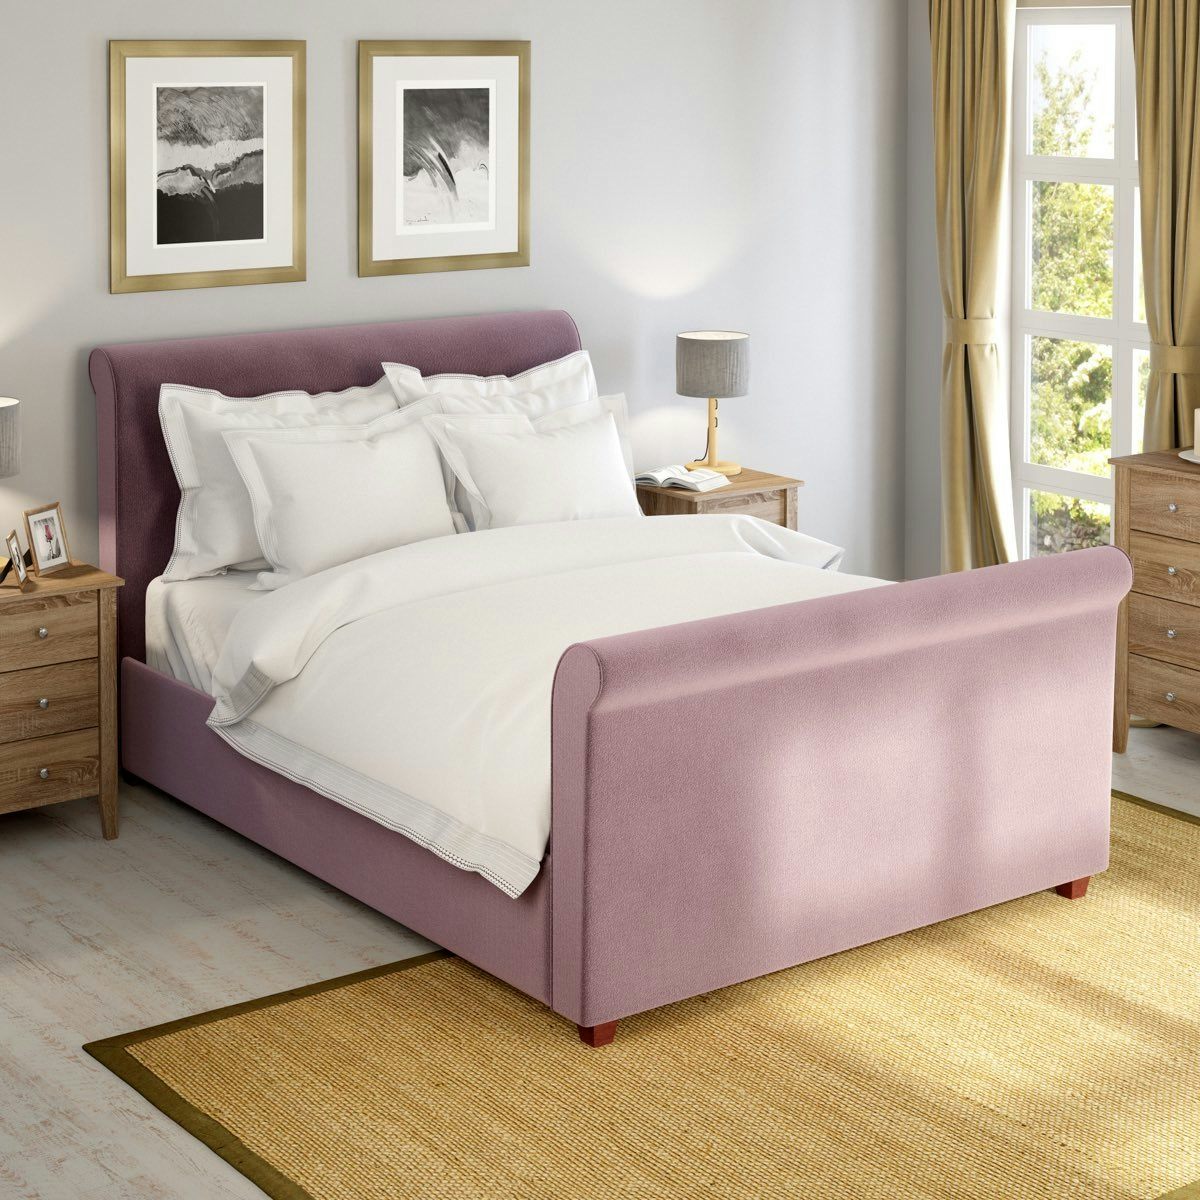 Lilac double bed